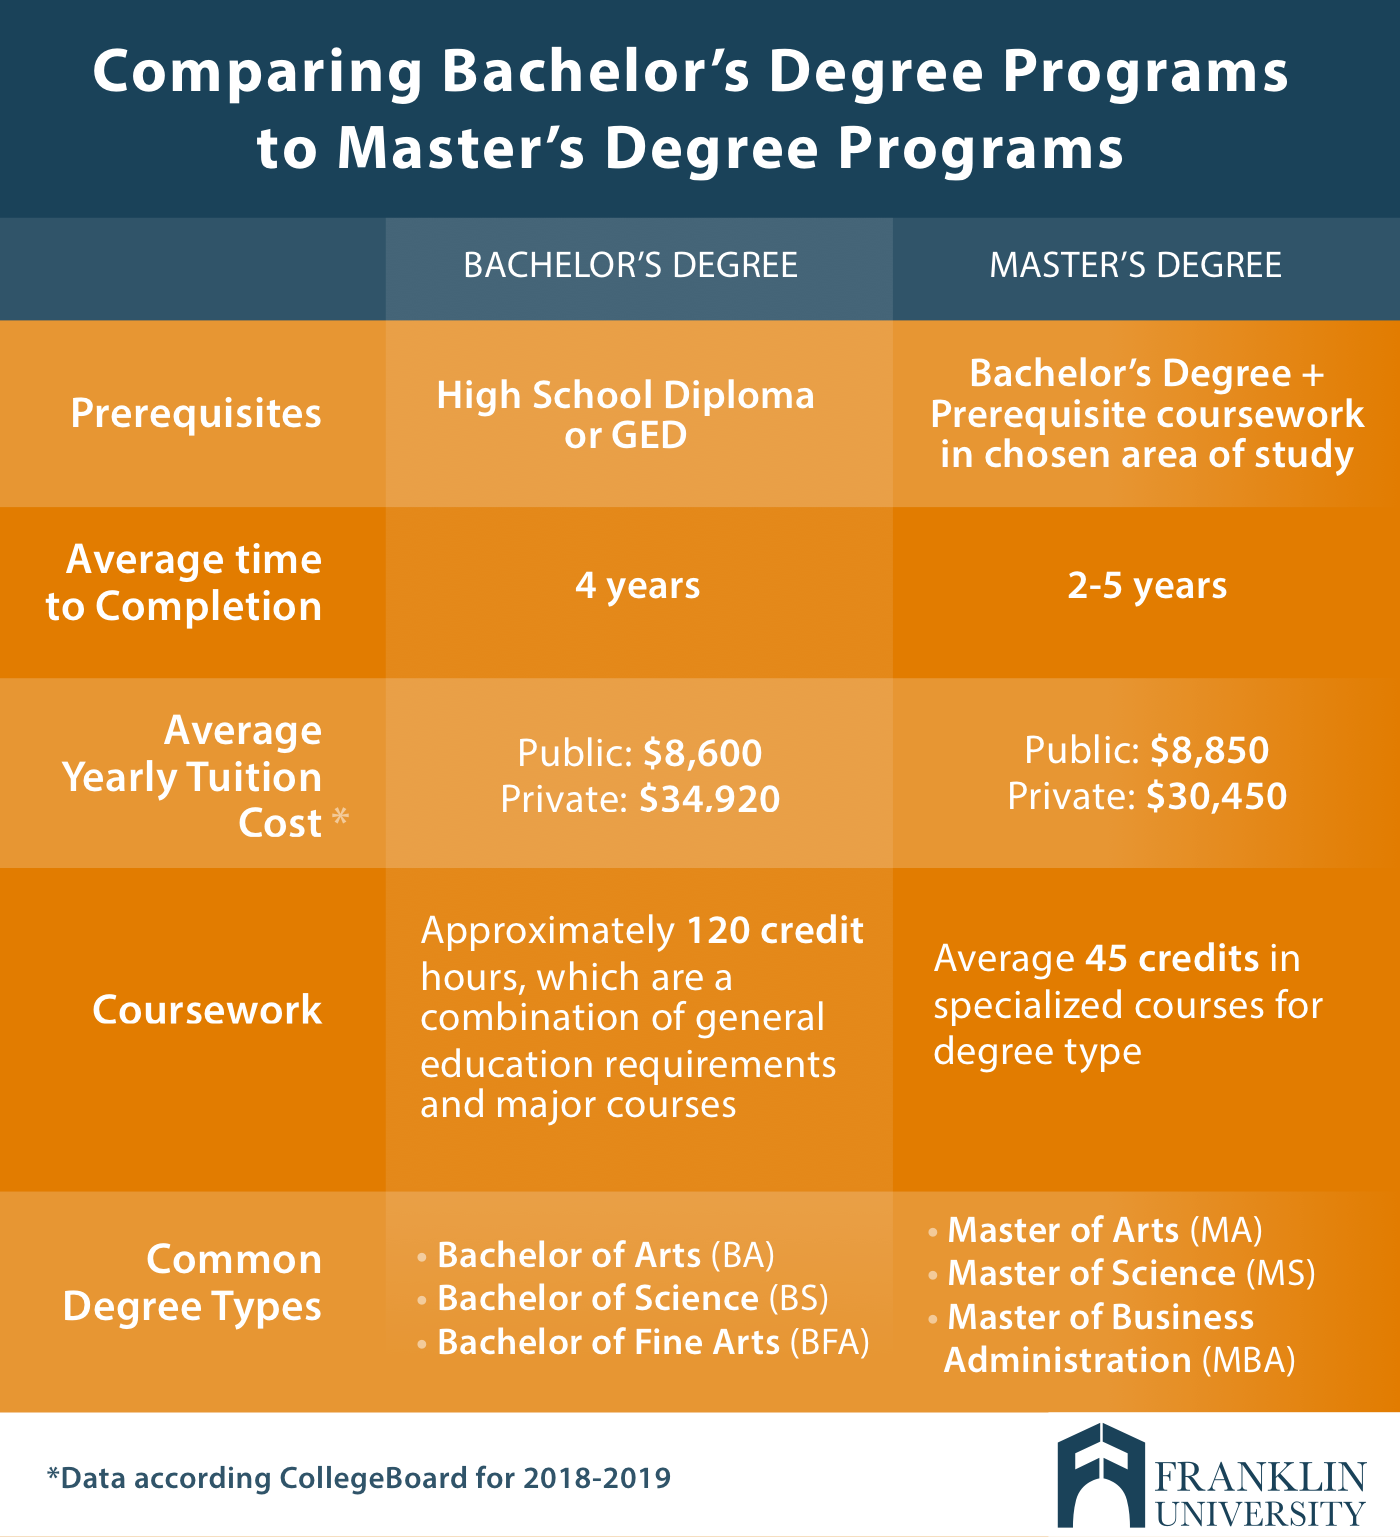 Which Is Higher Masters or Bachelors?